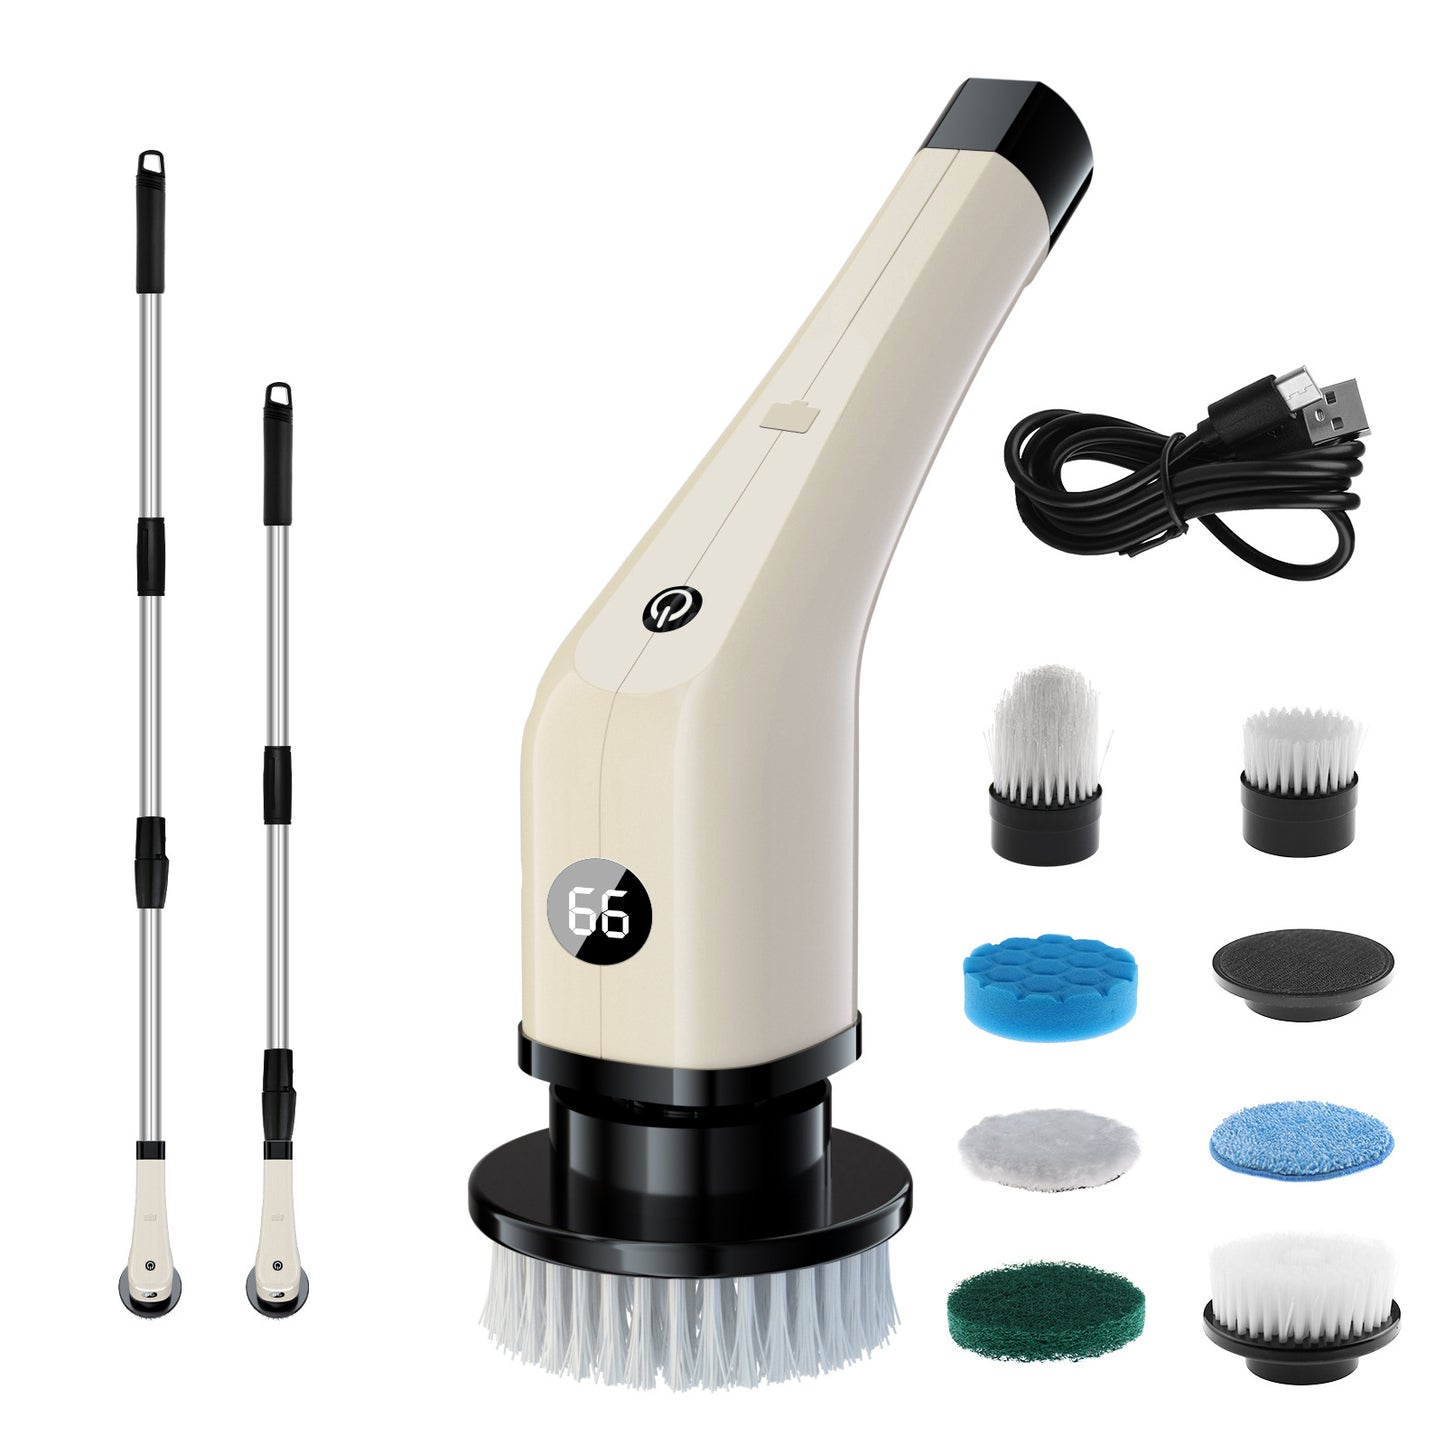 Electric Cleaning Brush, 7 in 1.